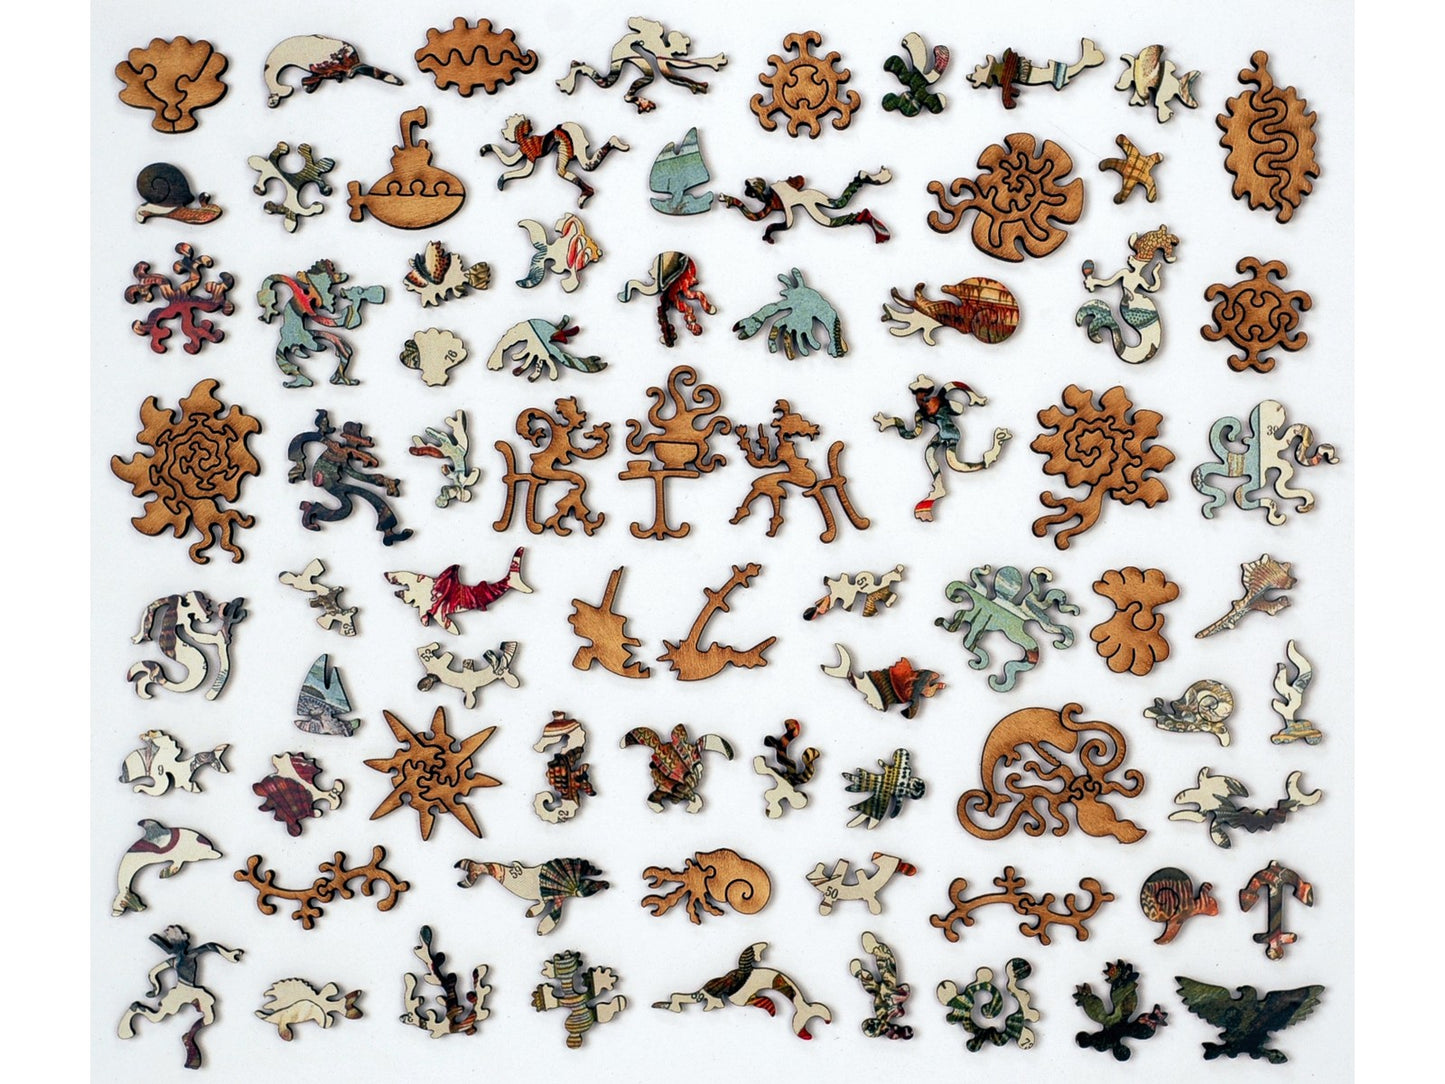 The whimsy pieces that can be found in the puzzle, Varieties of Molluscs.